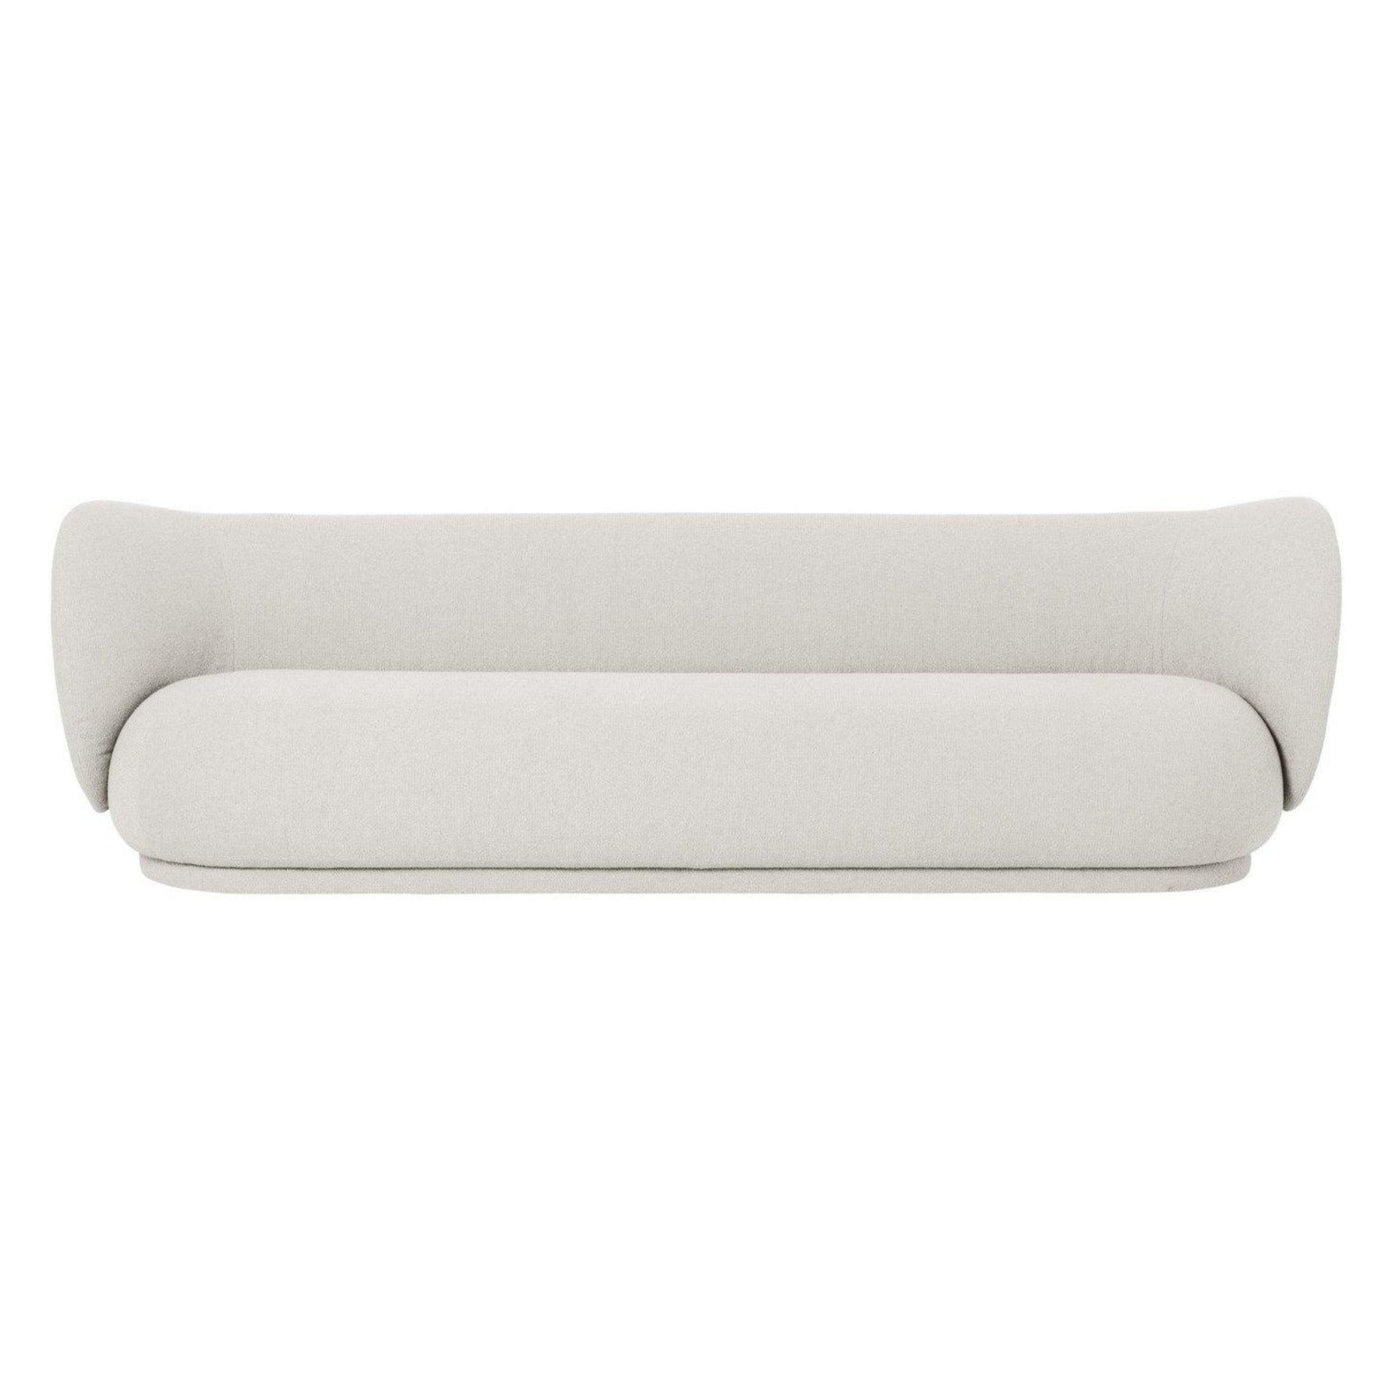 ferm living rico 4 seater sofa bouclé in off-white. Available from someday designs bouclé. #colour_off-white-boucle